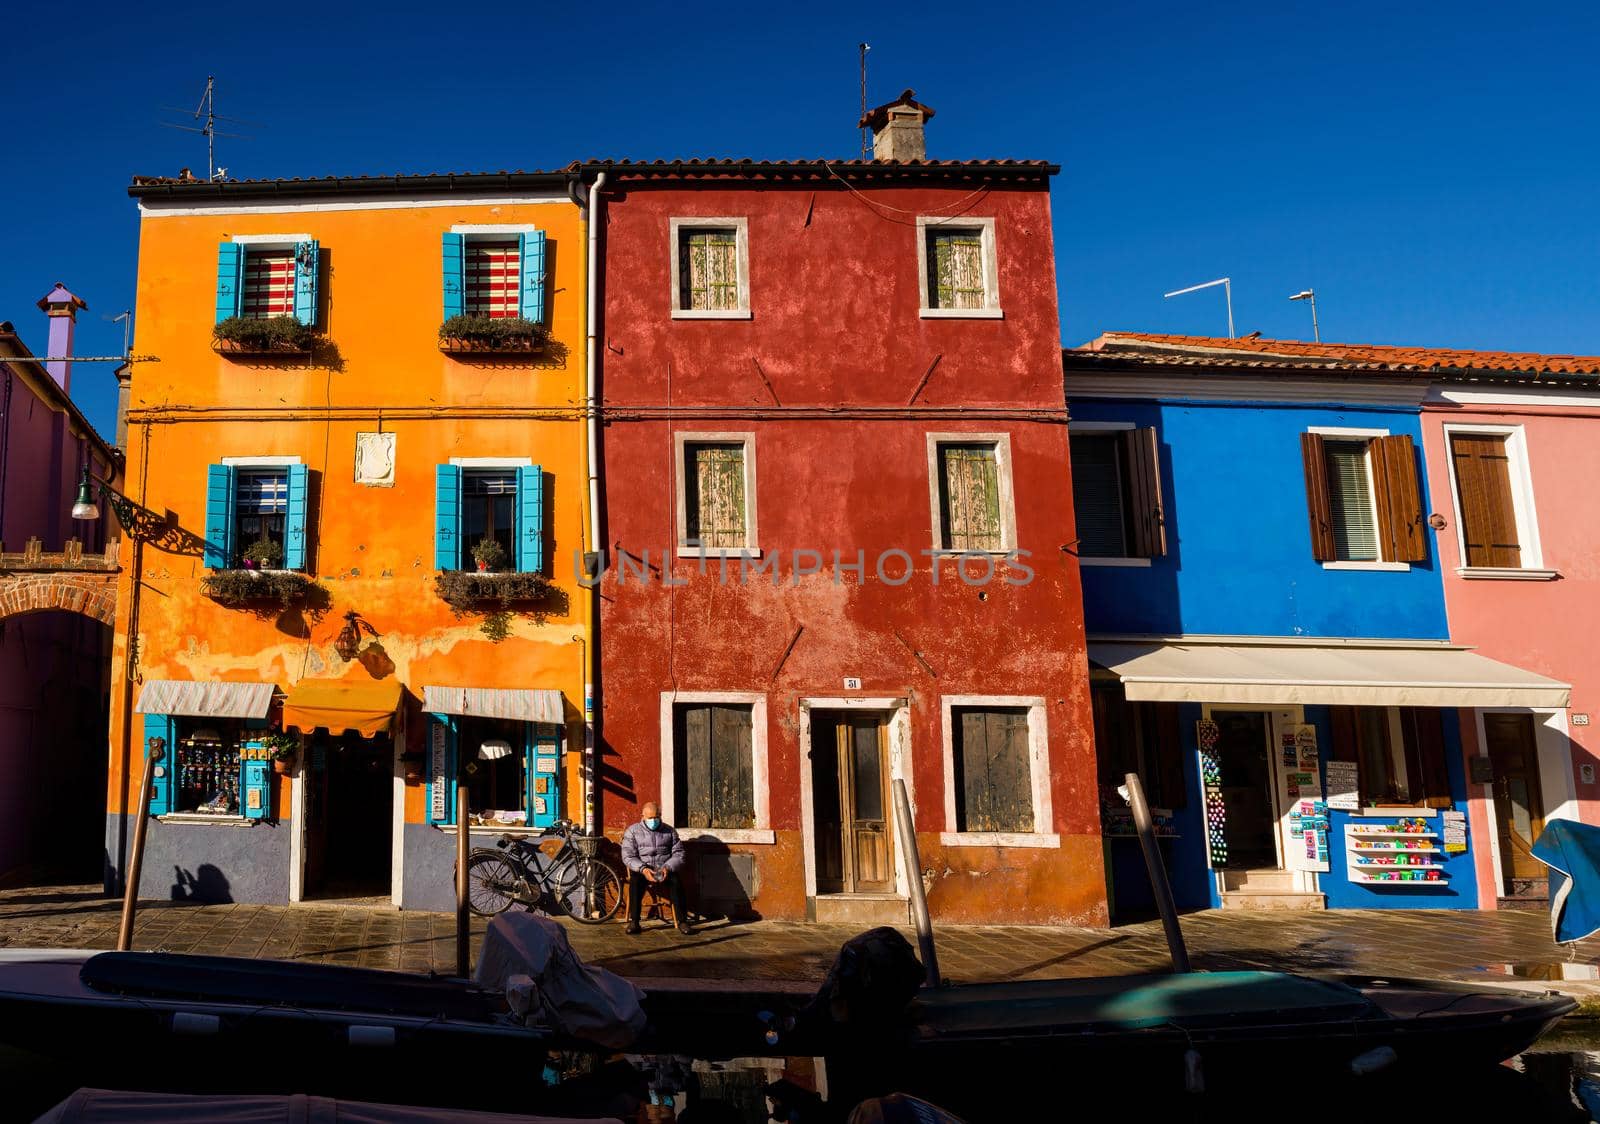 Burano, Italy- January, 06: Italian elderly man sitting outside his house next his bicycle, behind the colorful houses of Burano island on January 06, 2022